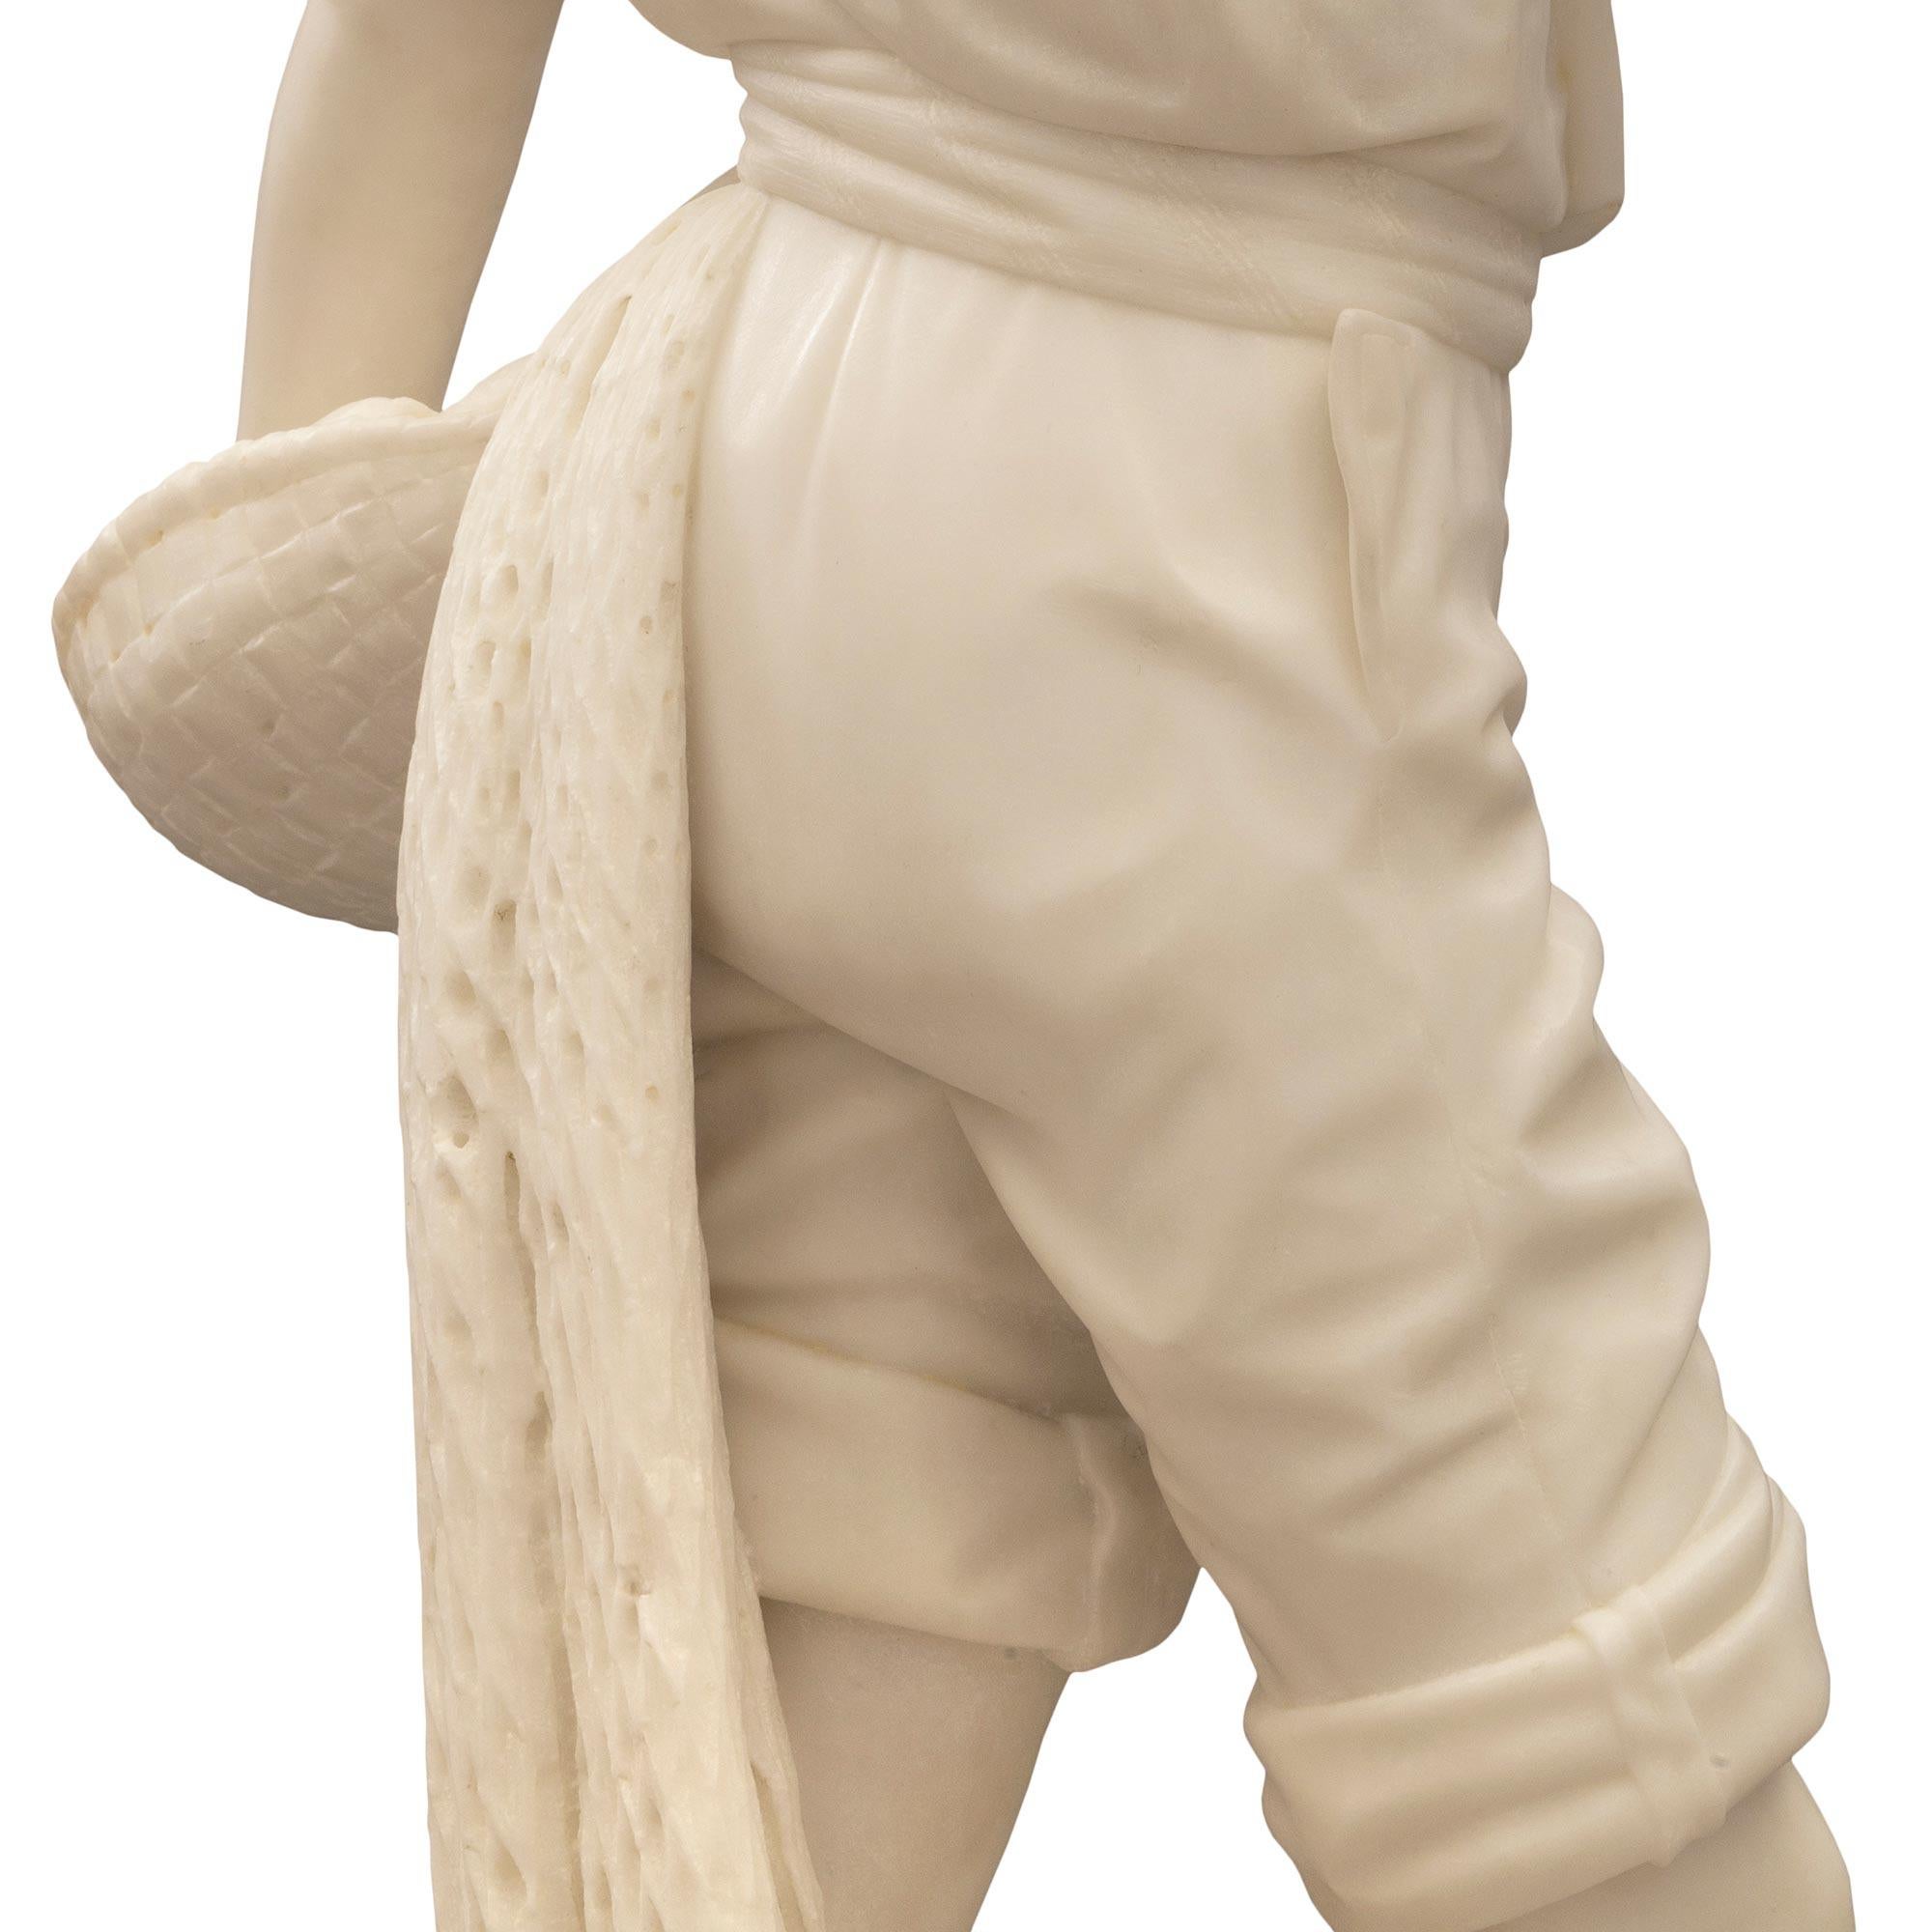 Italian 19th Century Solid White Carrara Marble Statue of a Young Fisherman For Sale 4